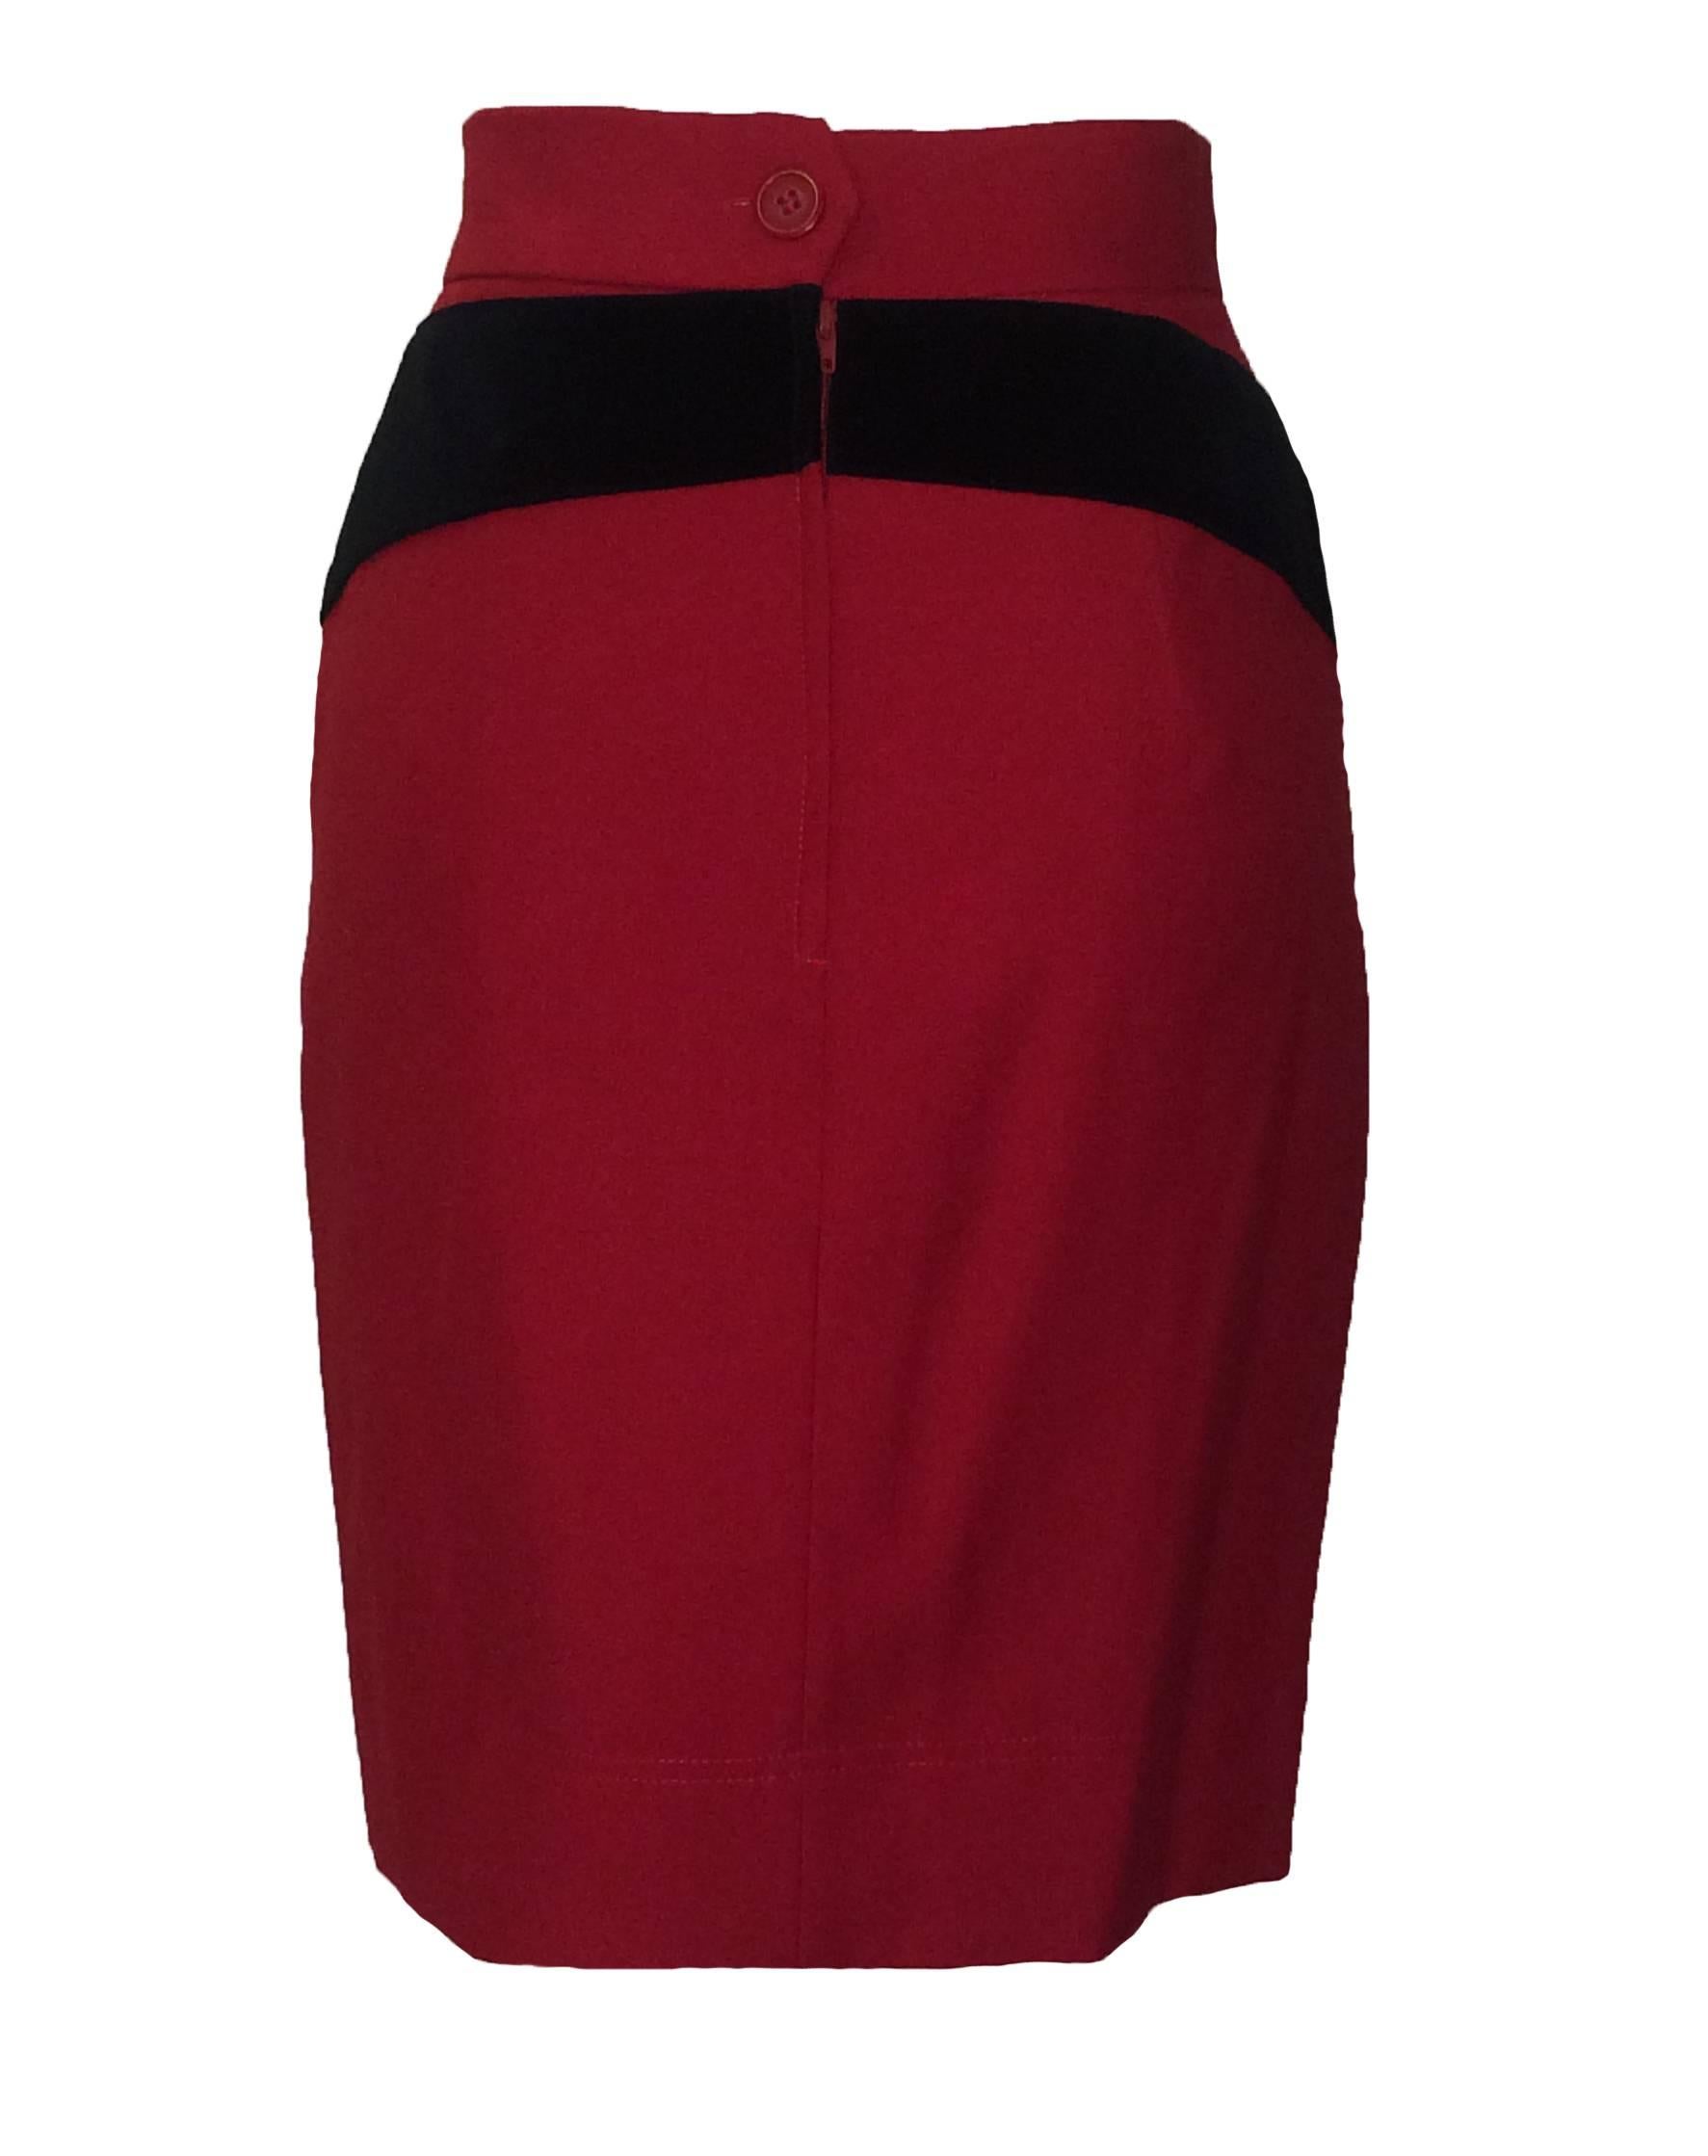 Moschino Cheap & Chic 90's red pencil skirt with black velvet question mark detail. Back zip & button. 

Made in Italy.

100% wool. 
Fully lined in 60% acetate, 40% rayon.

Size IT 42, US 8. Fits like a modern small.
Waist 27